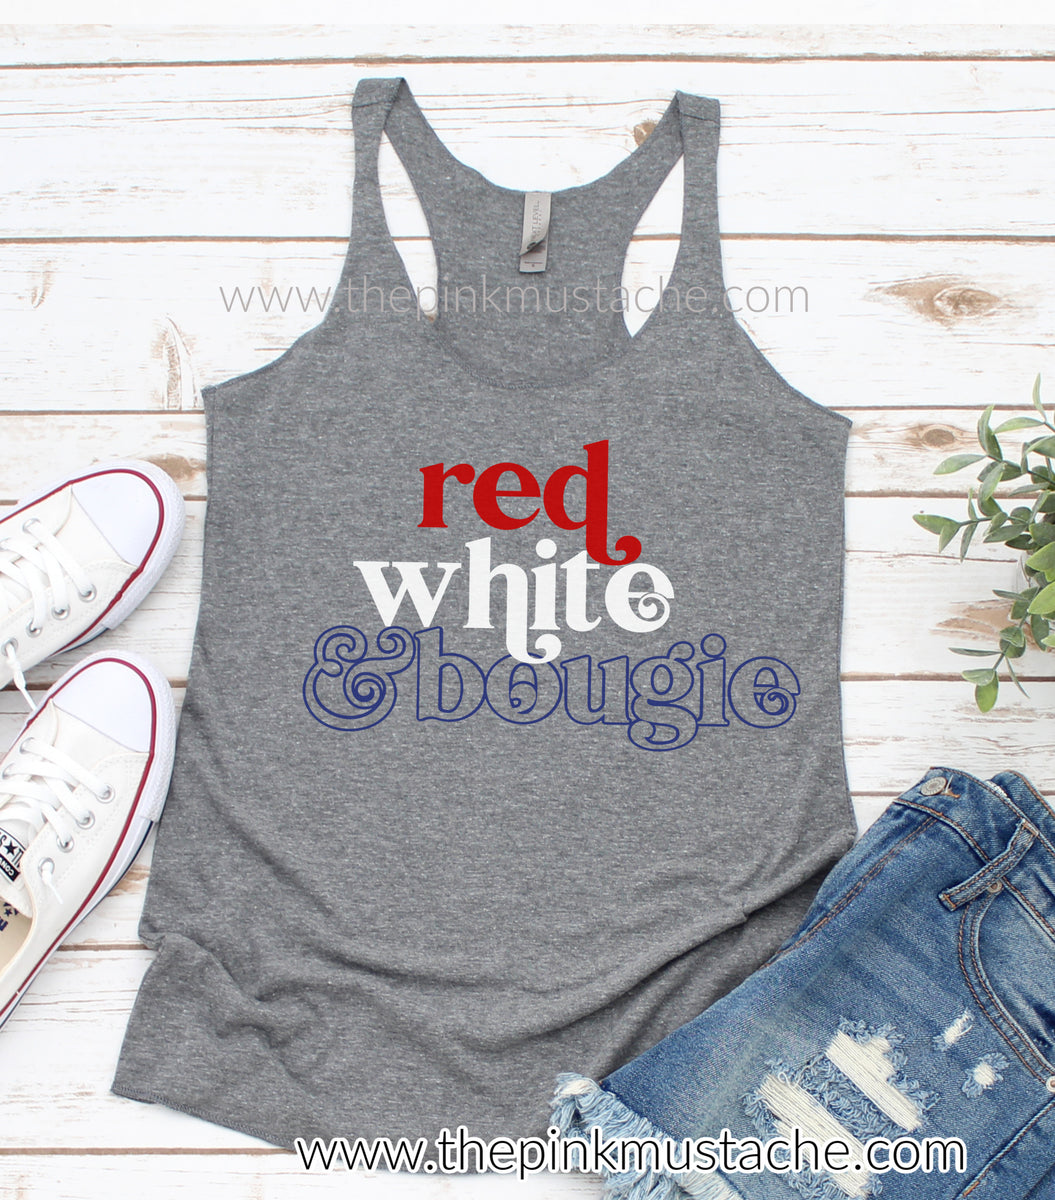 red white and boujee t shirt